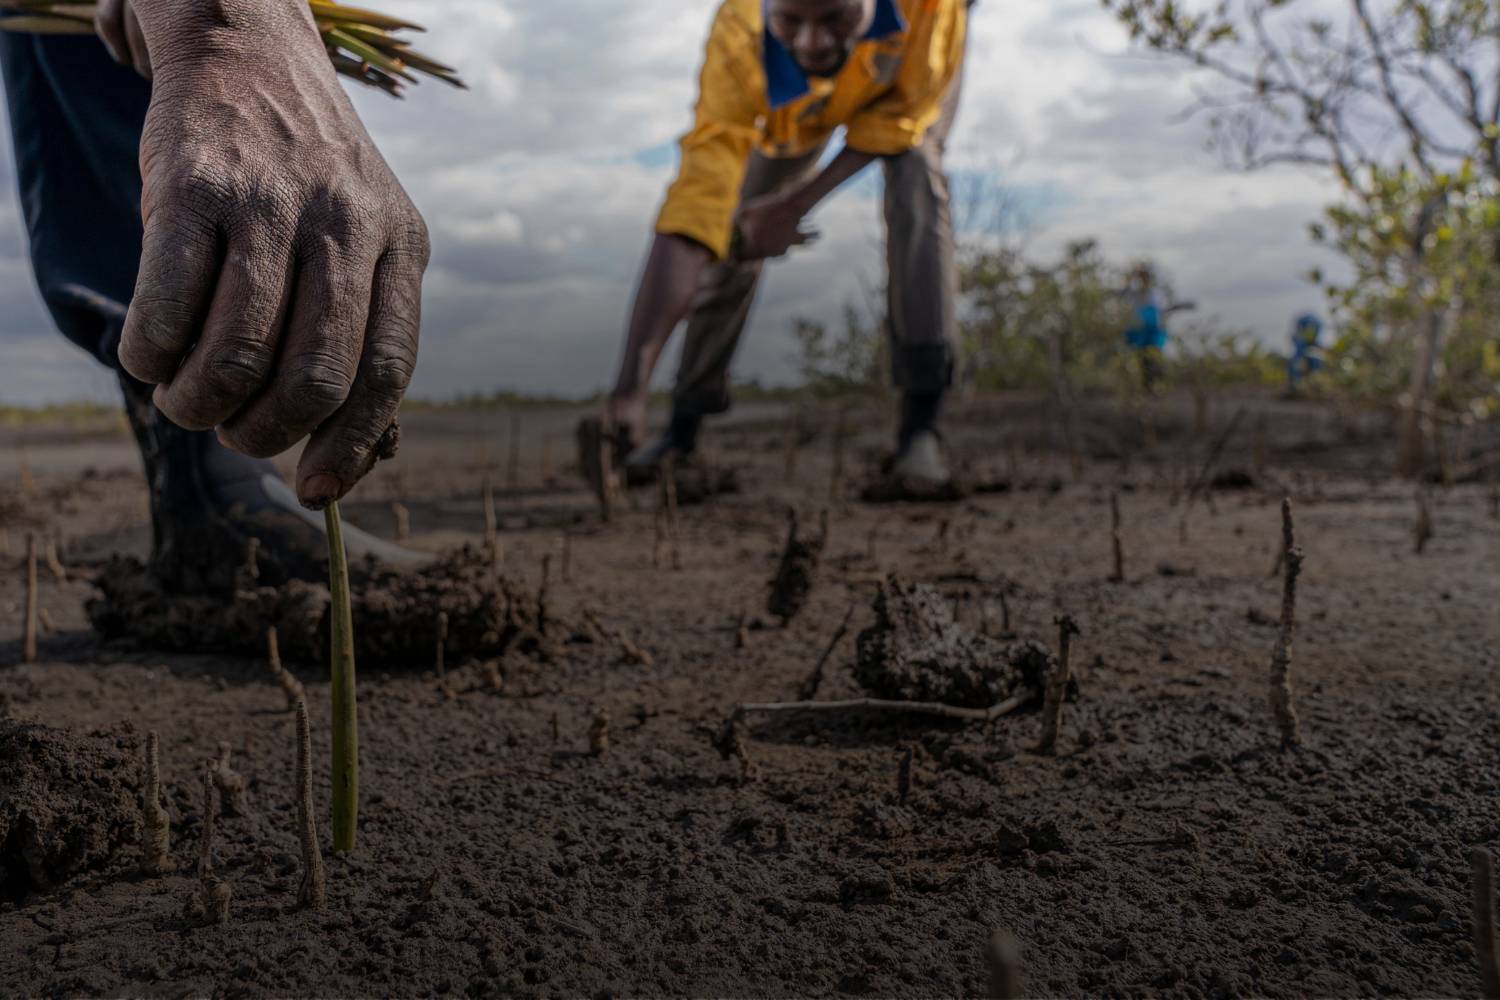 Tree seedlings being cut by local community in Mozambique